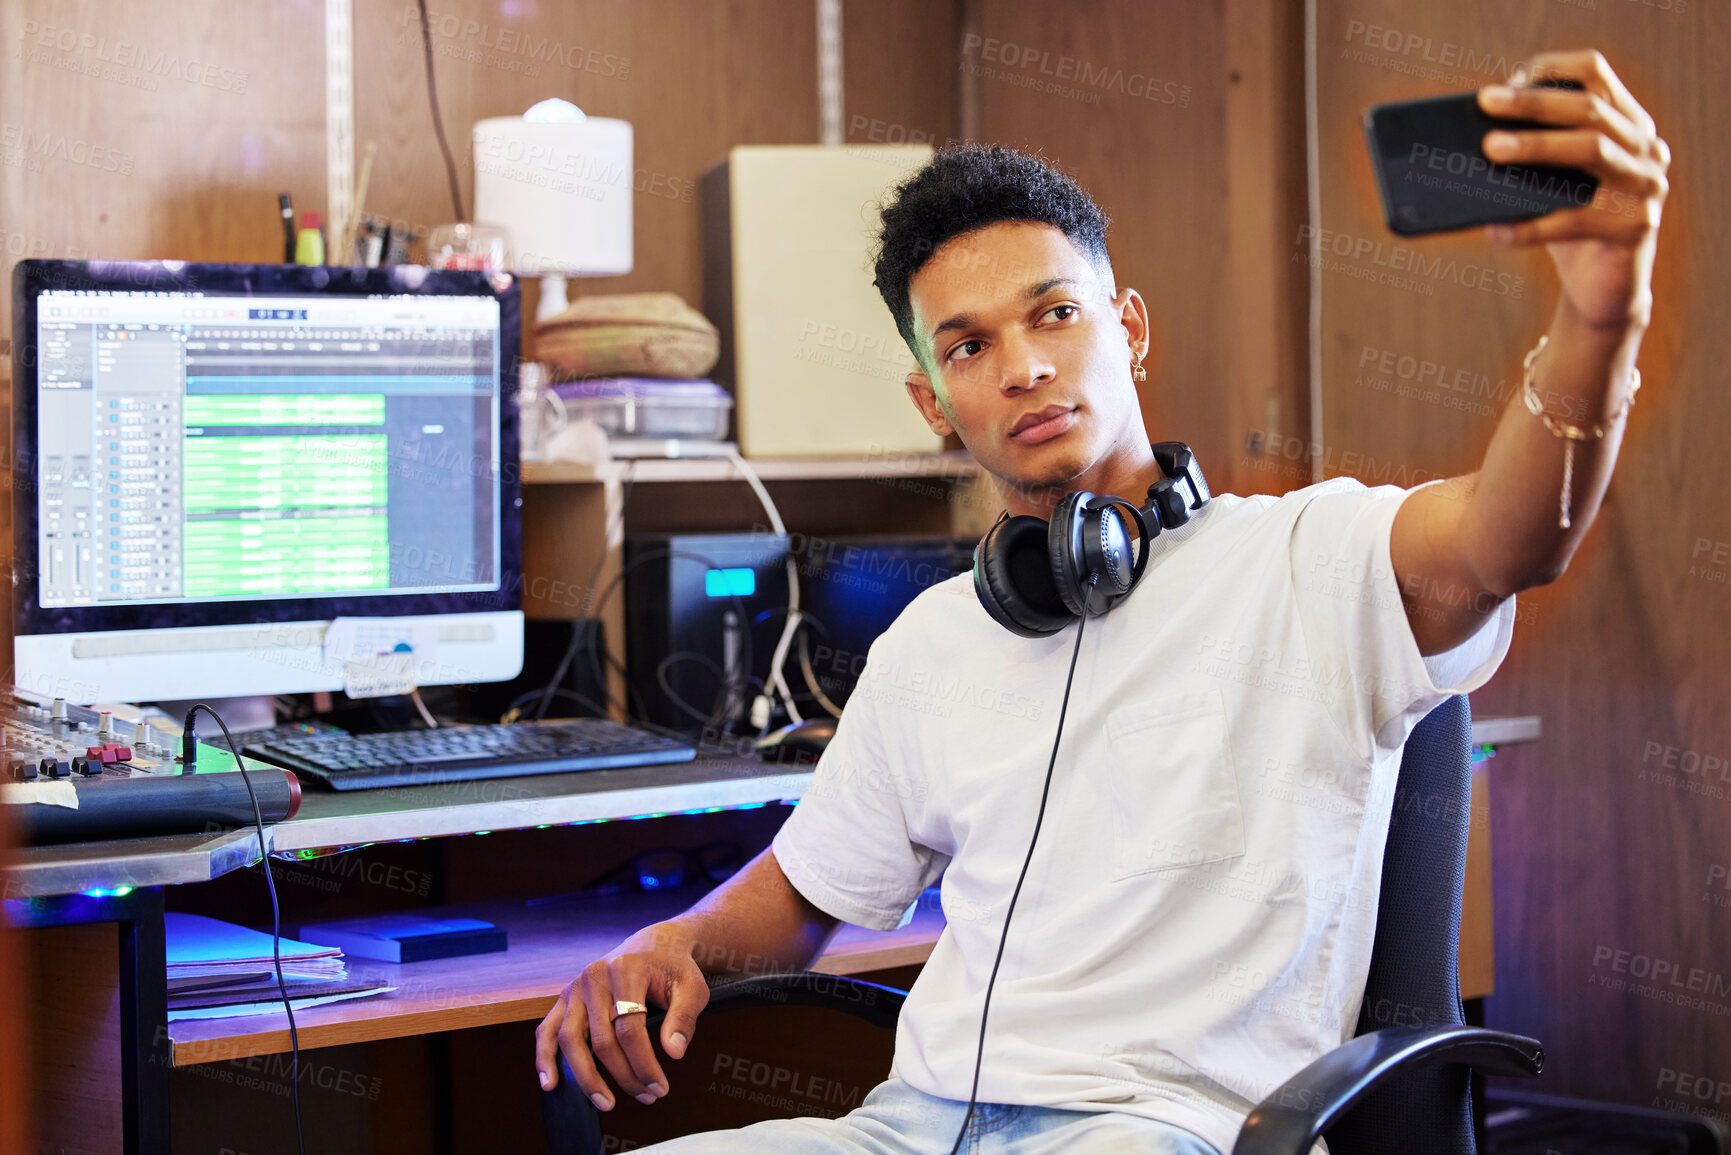 Buy stock photo Cropped shot of a handsome young male music producer taking selfies while working in his home office